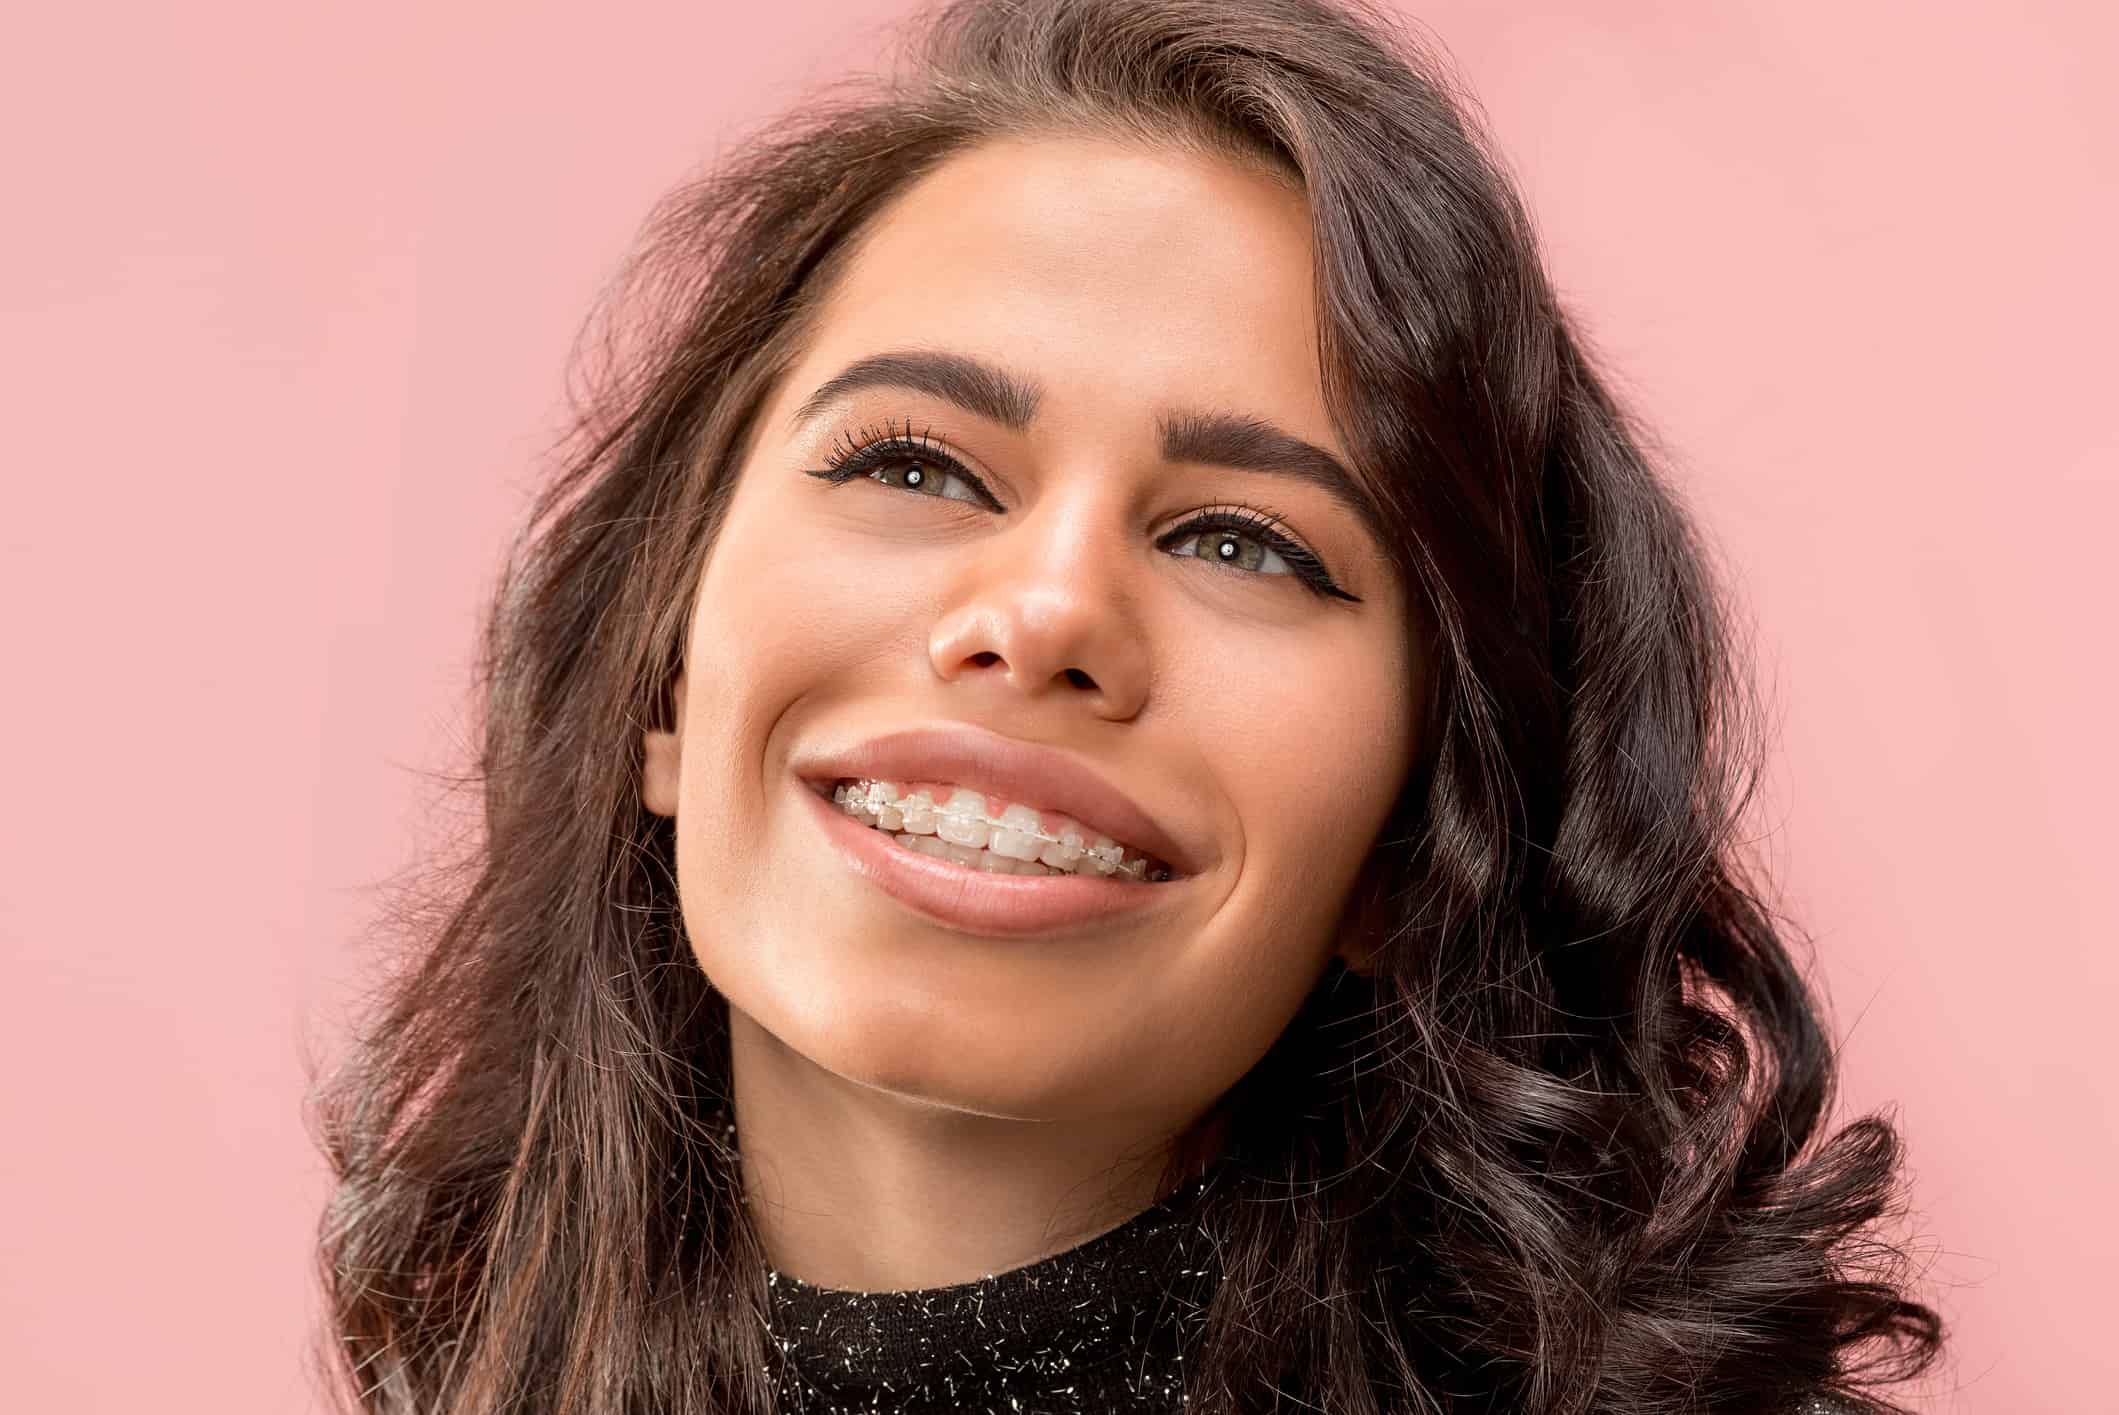 Woman smiling with a clear braces on teeth